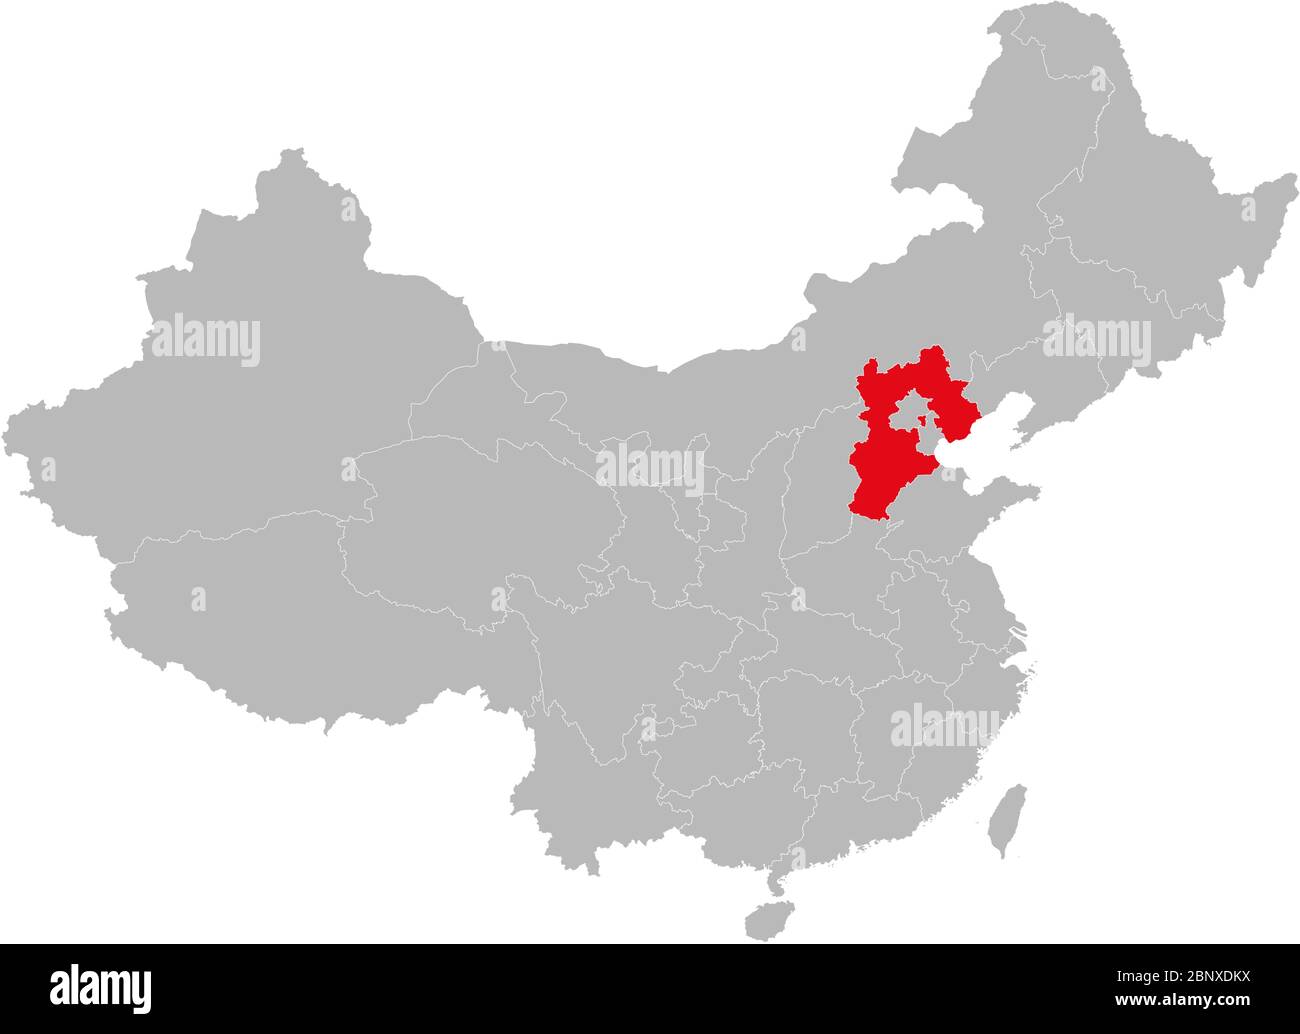 Hebei province highlighted on china map. Gray background. Asian country. Stock Vector